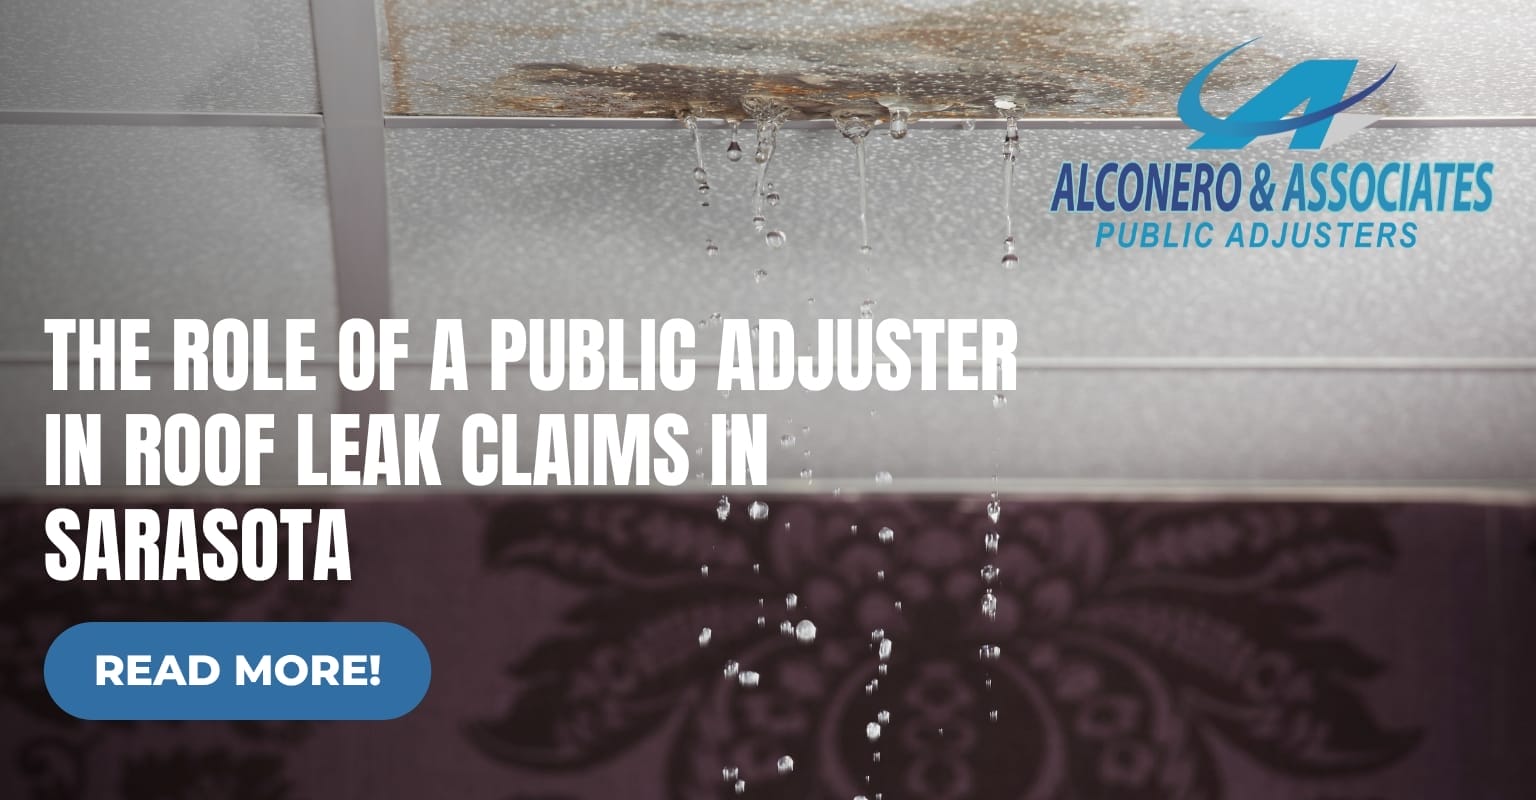 The Role of a Public Adjuster in Roof Leak Claims in Sarasota